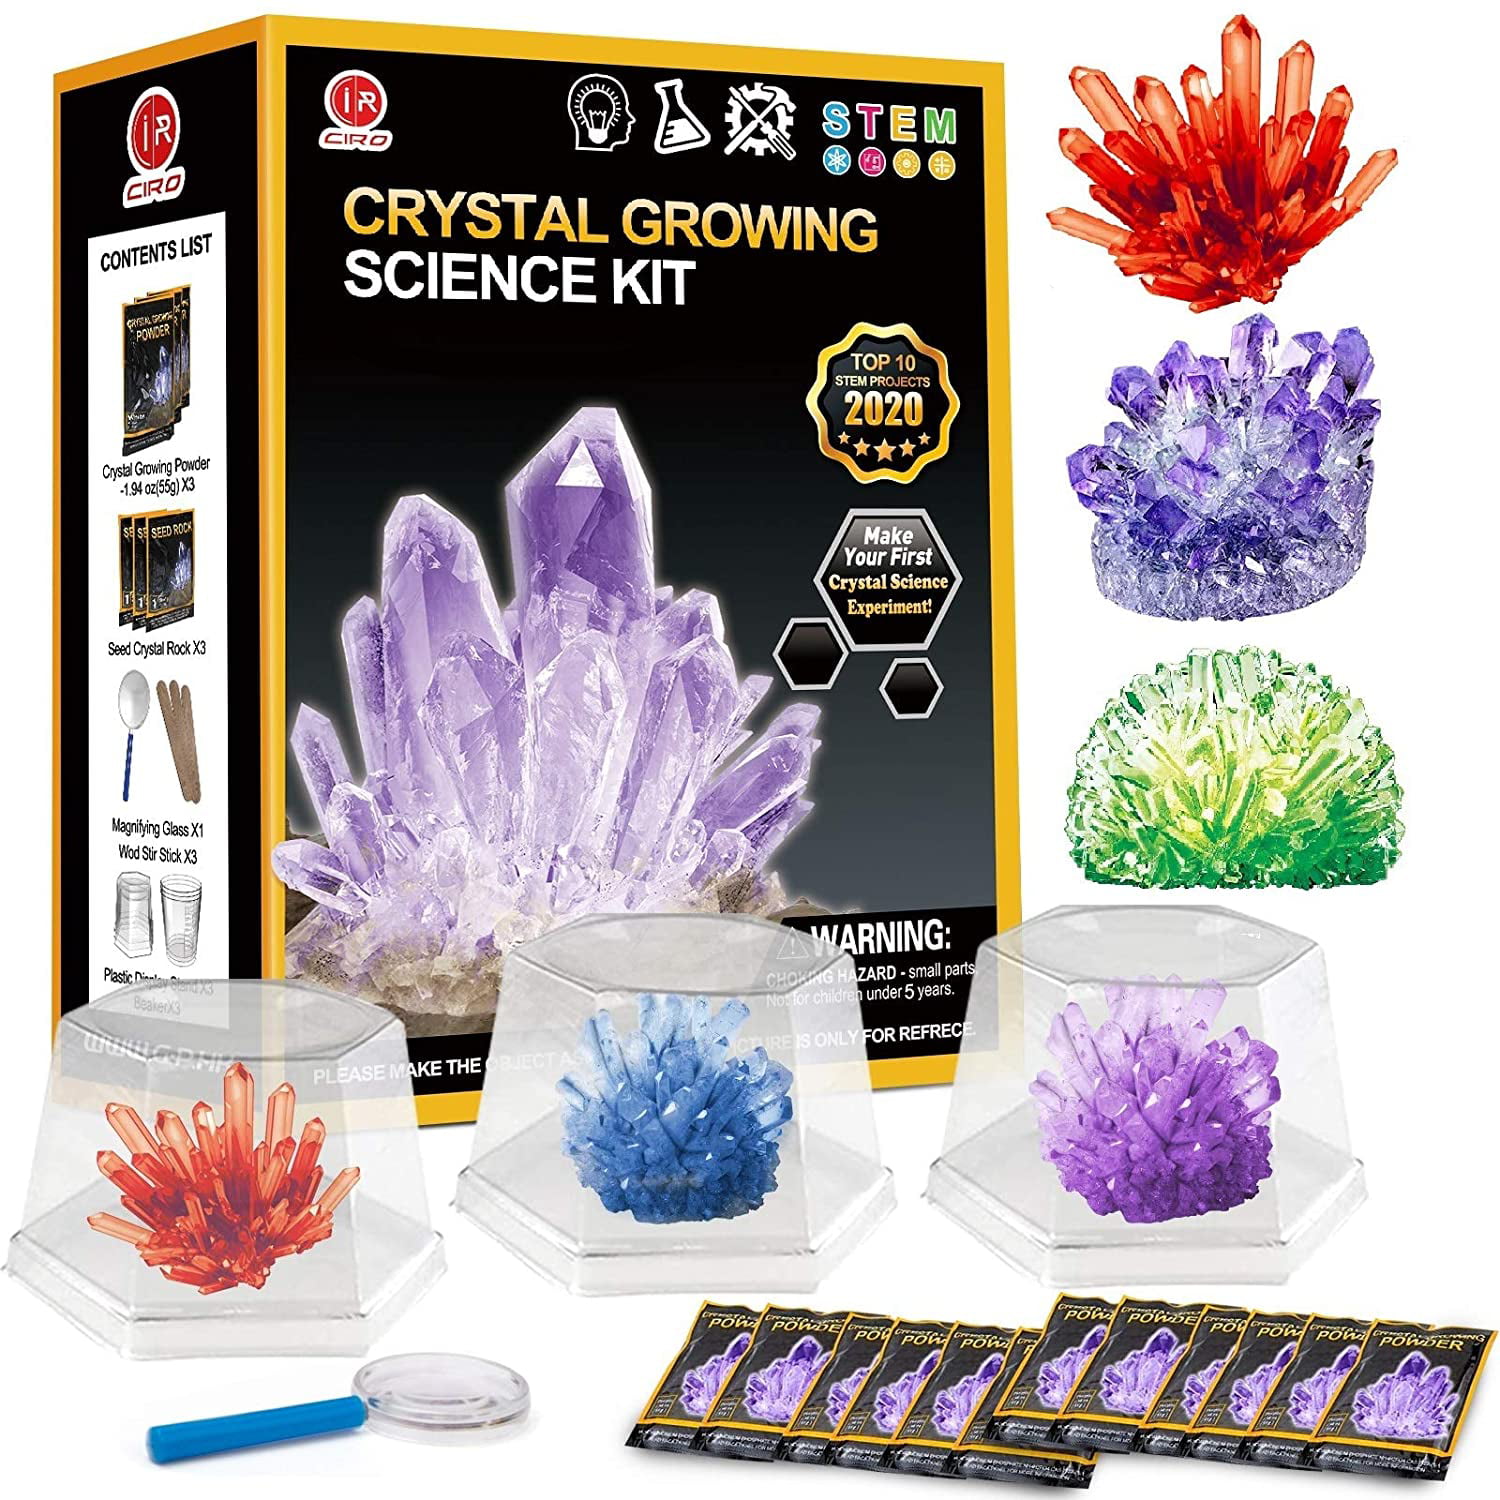 4M Crystal Growing Experiment Kit 5557 for sale online